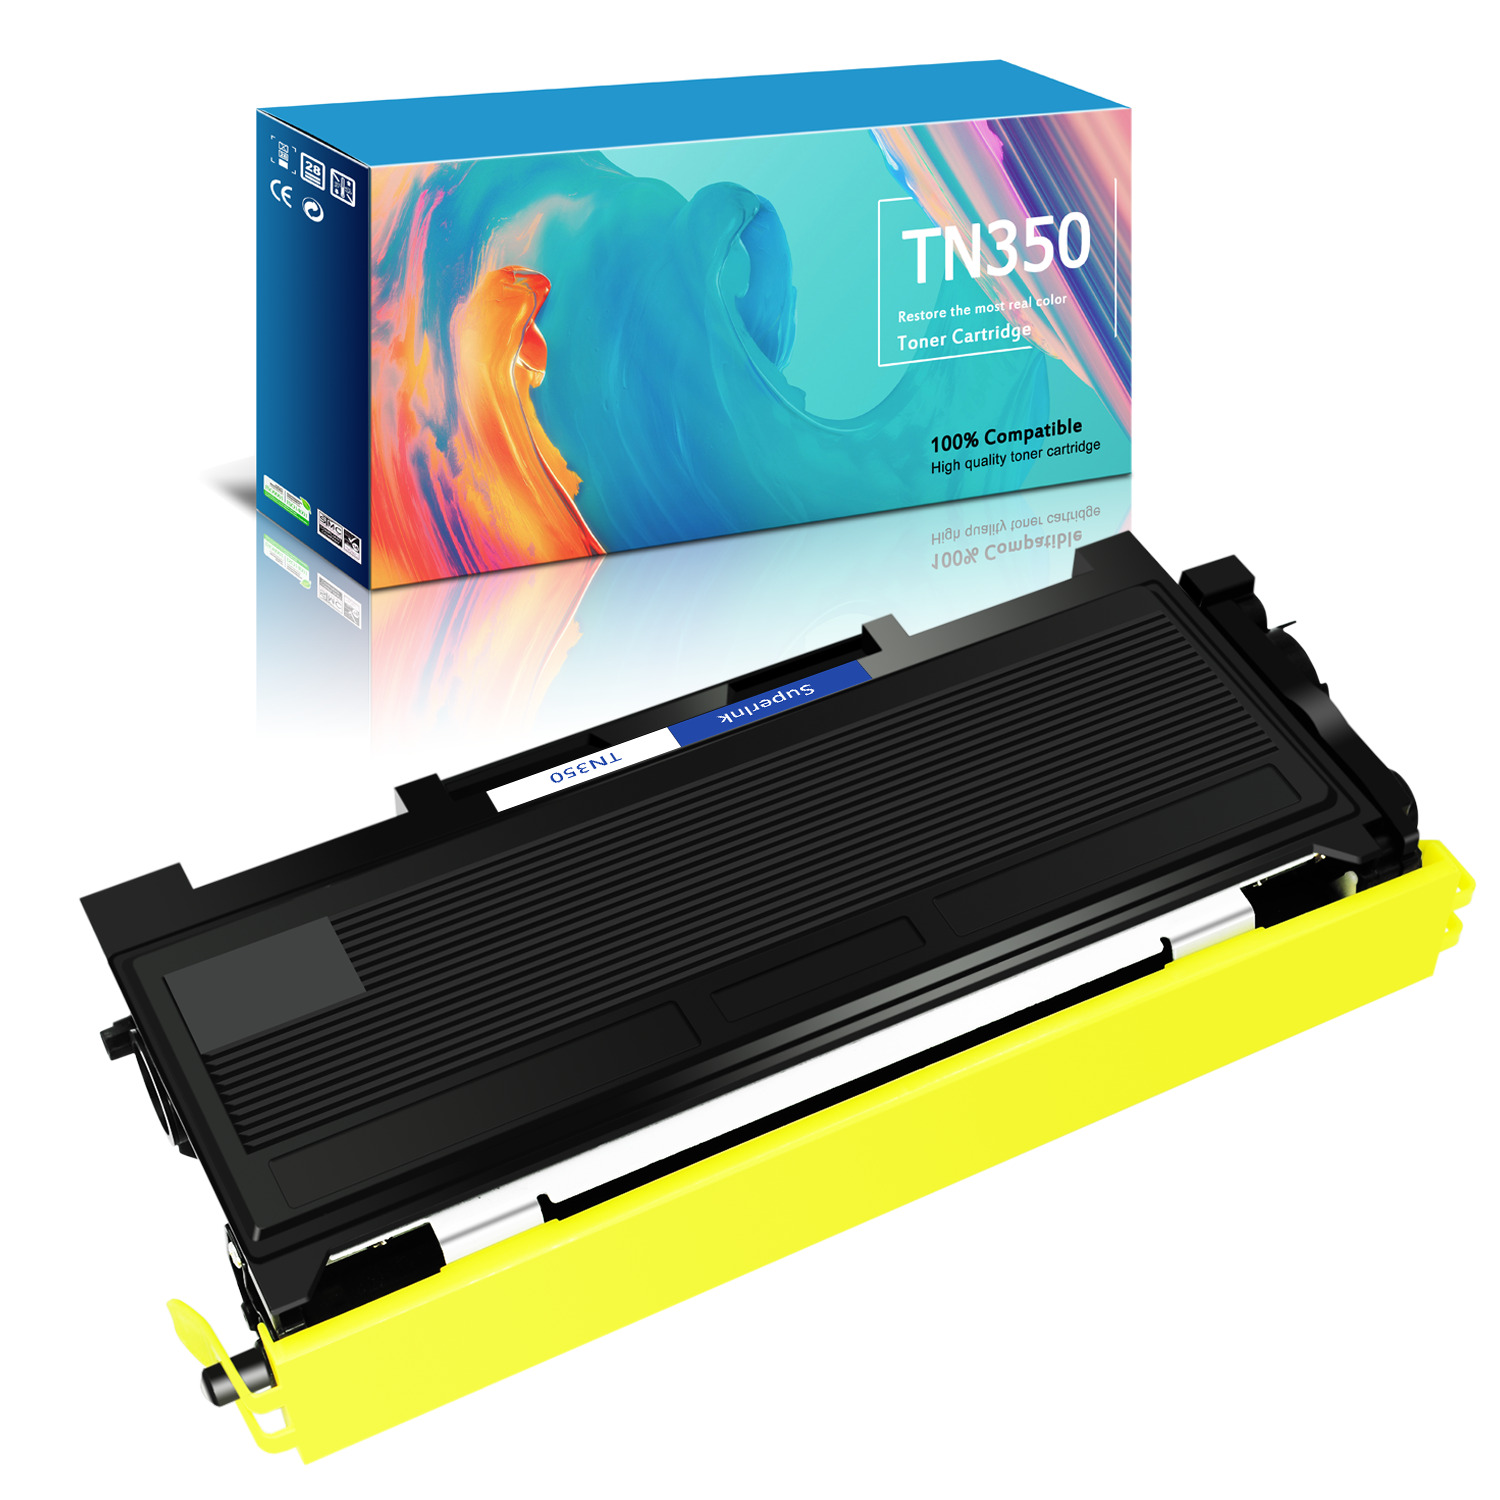 High Yield TN350 Toner Cartridge for Brother DCP-7010 7020 7025 HL-2030 Printer